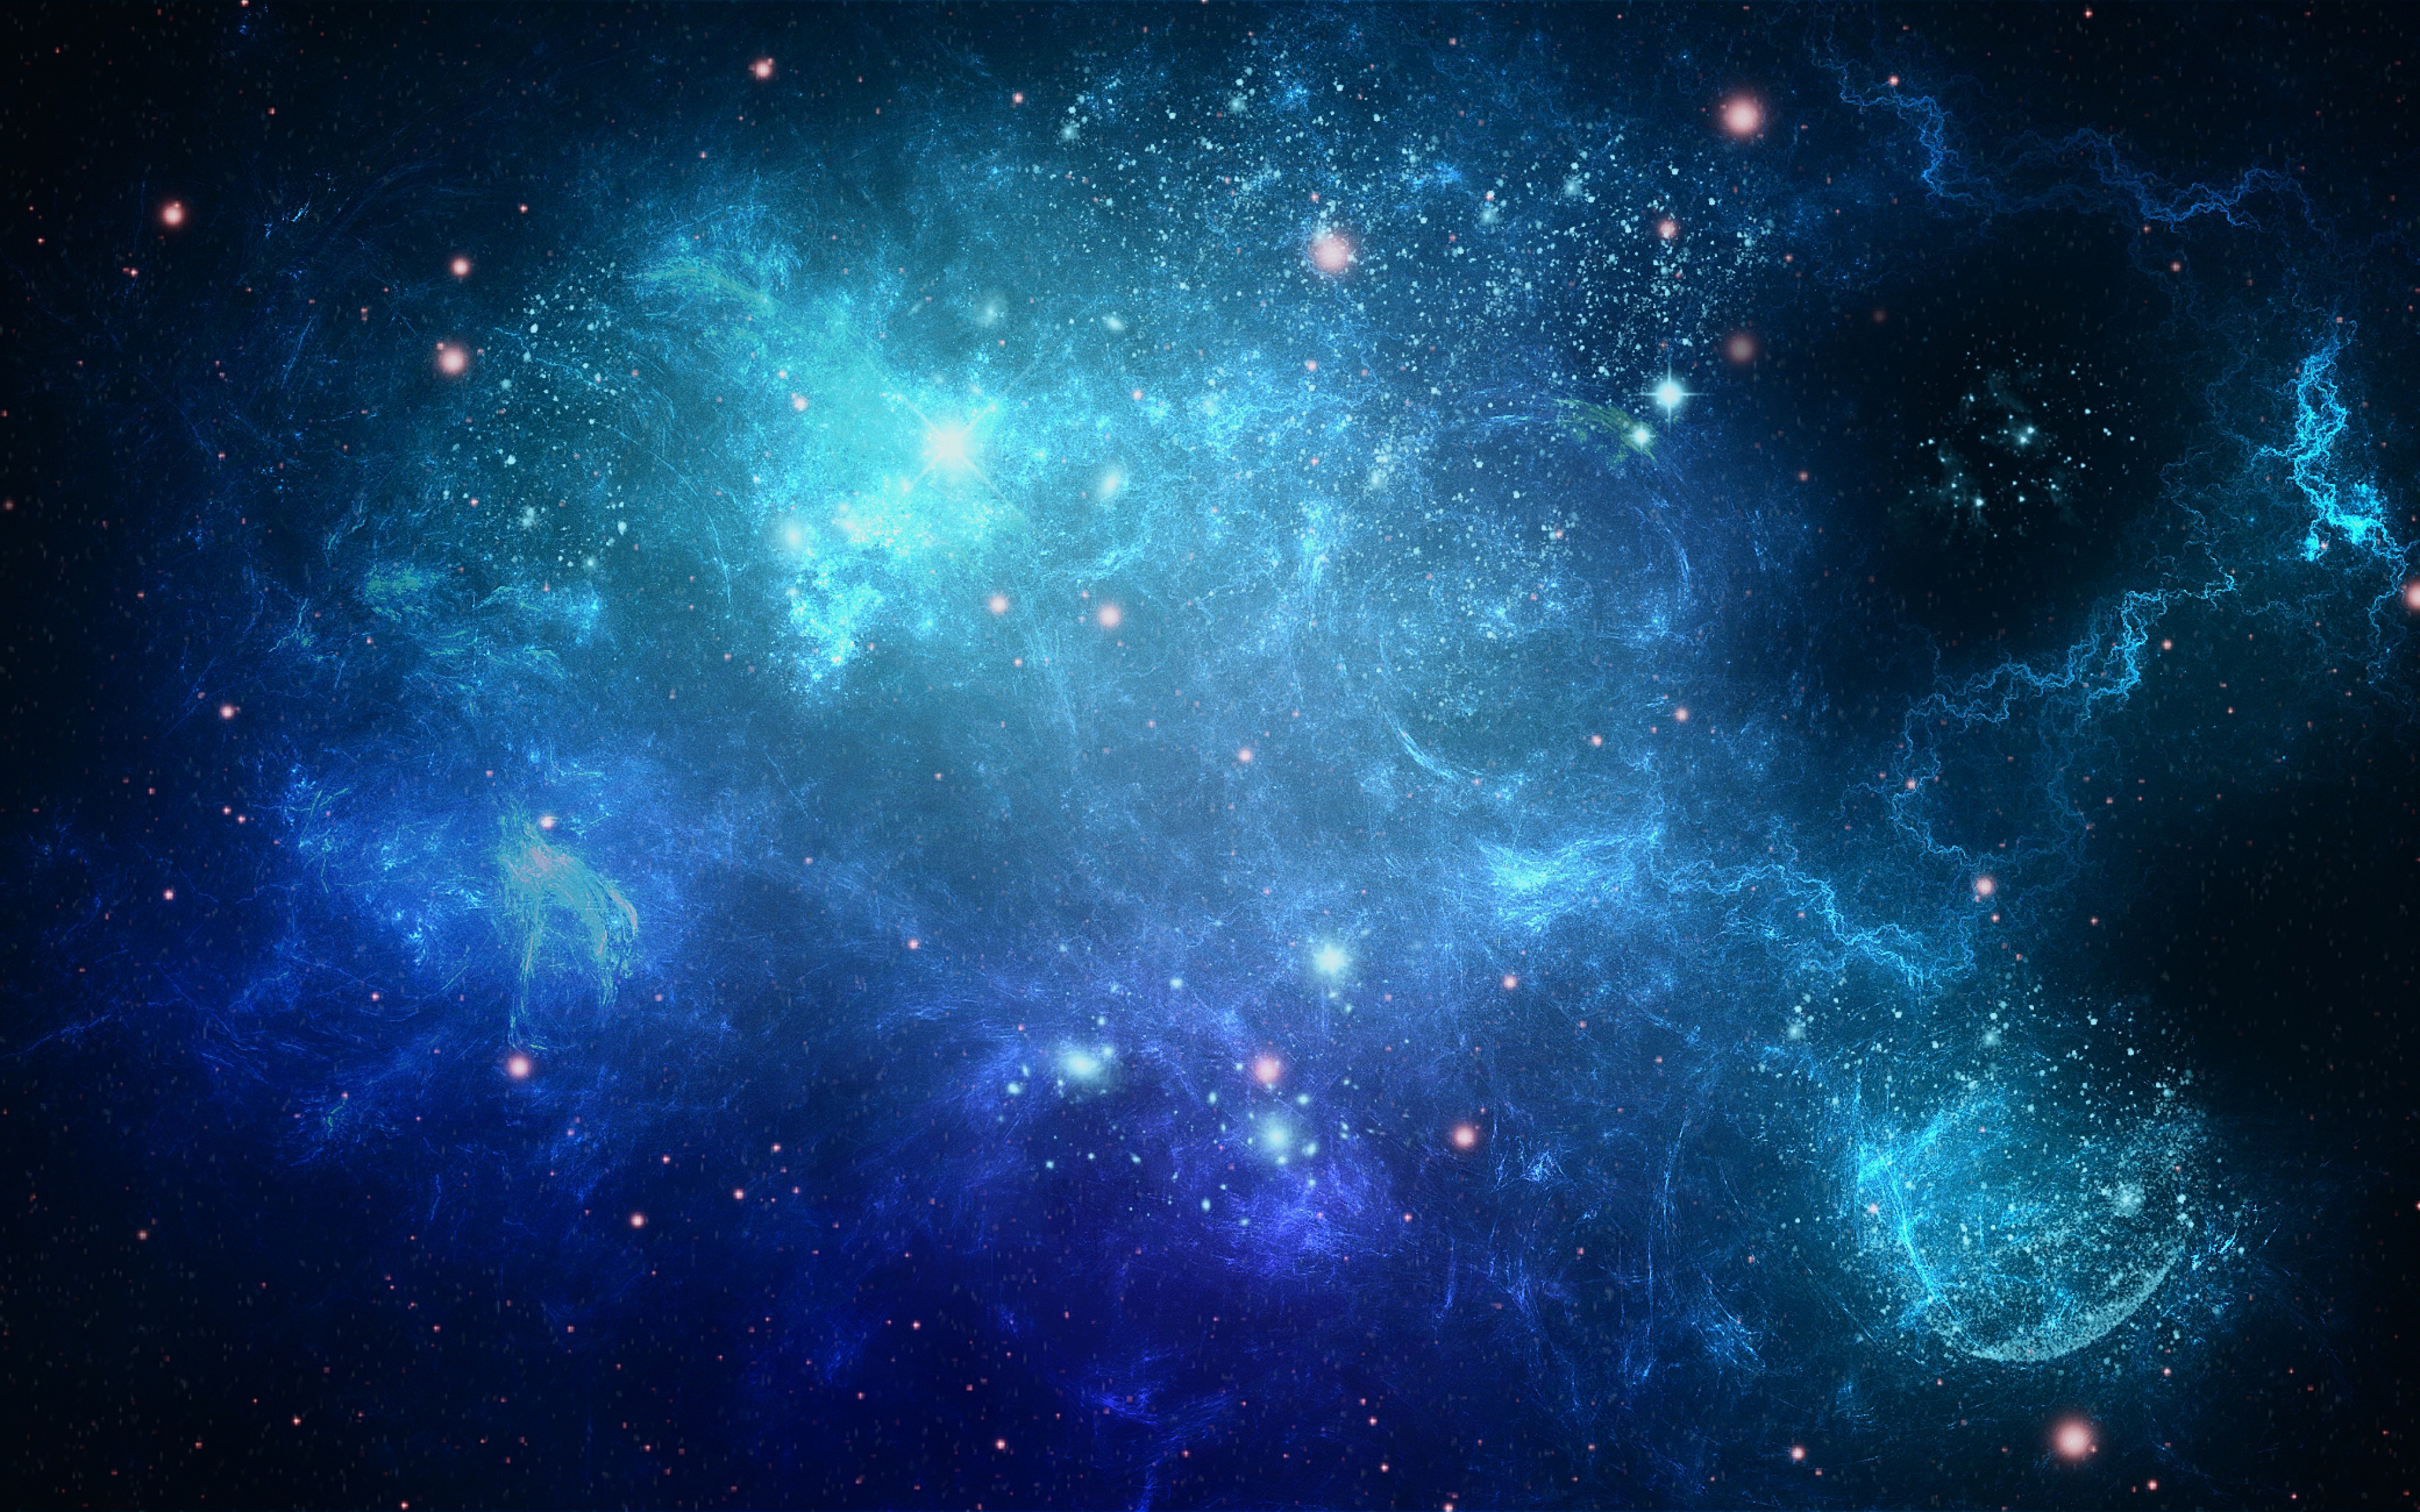  Beautiful Space Star Cluster Galaxy Blue Violet Gas Pattern Wallpaper 3840x2400